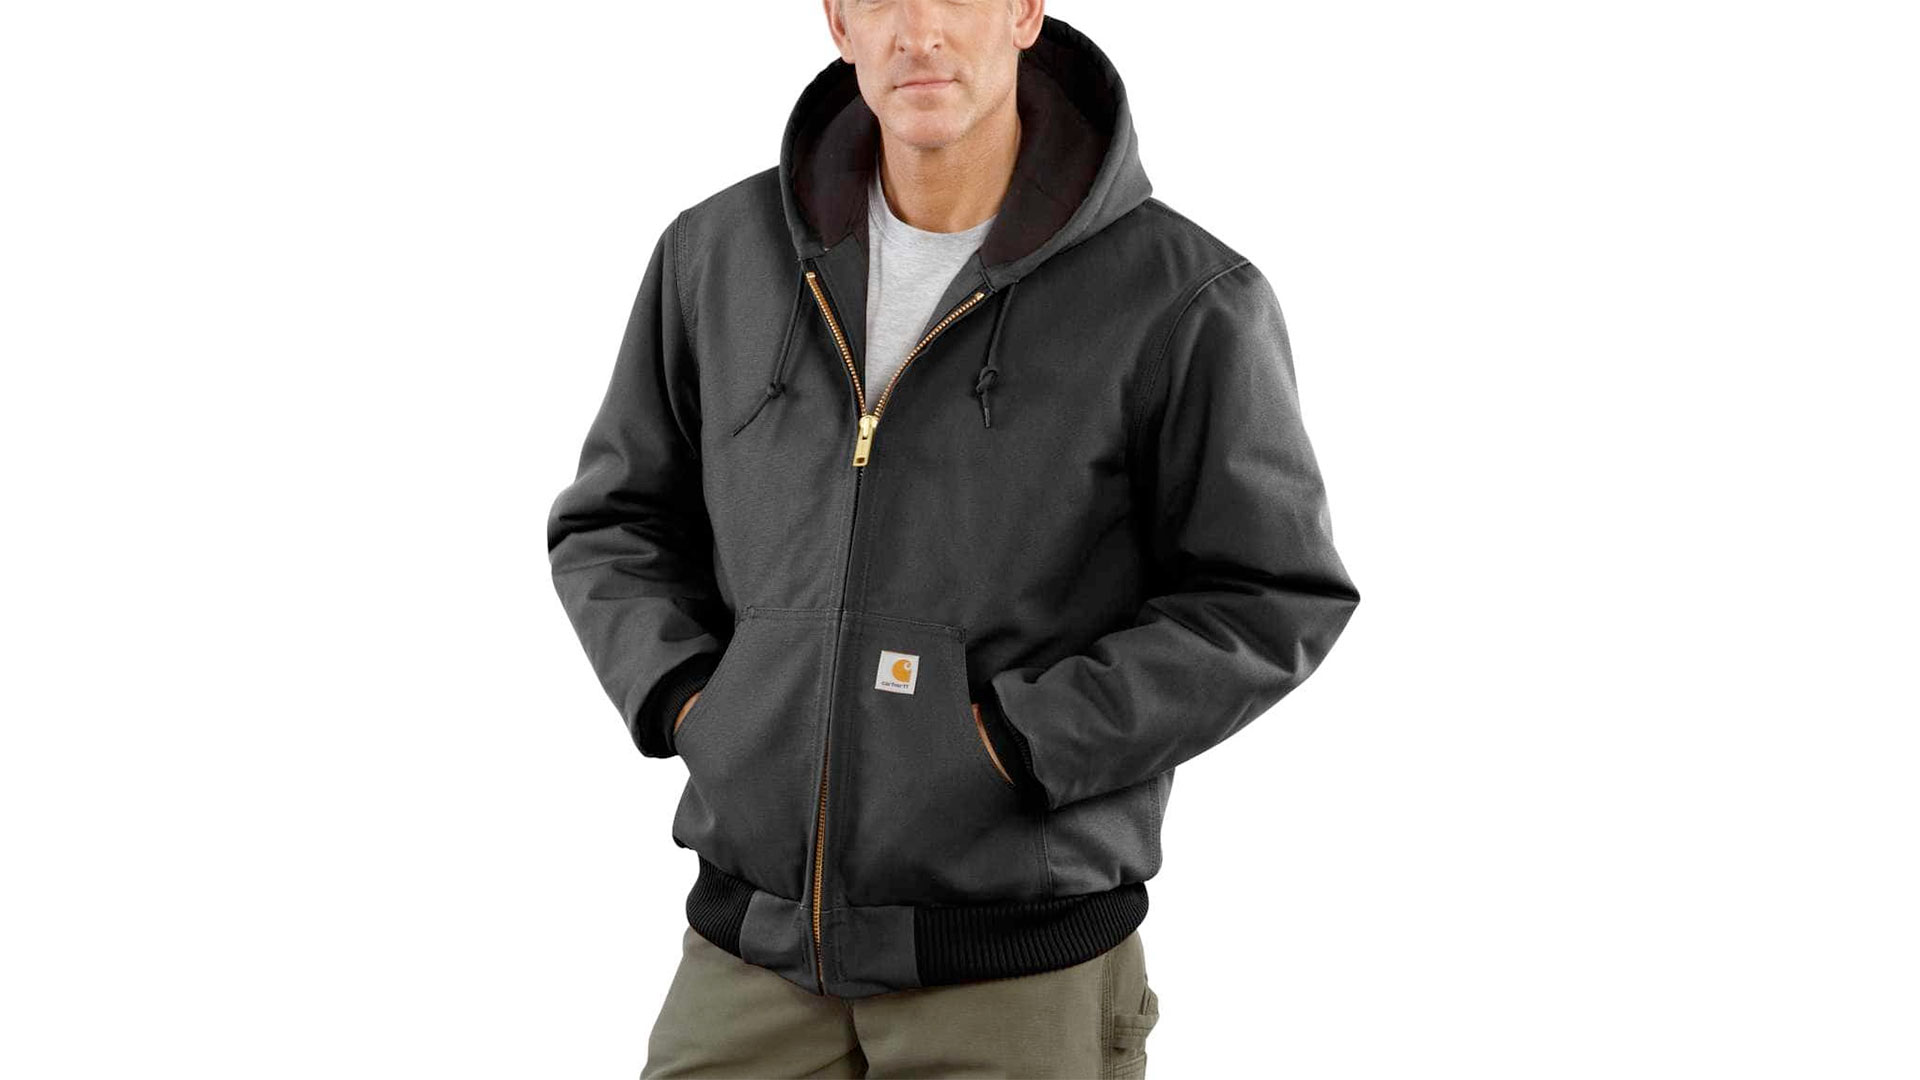 Carhartt Quilted Lined Jacket | canoeracing.org.uk